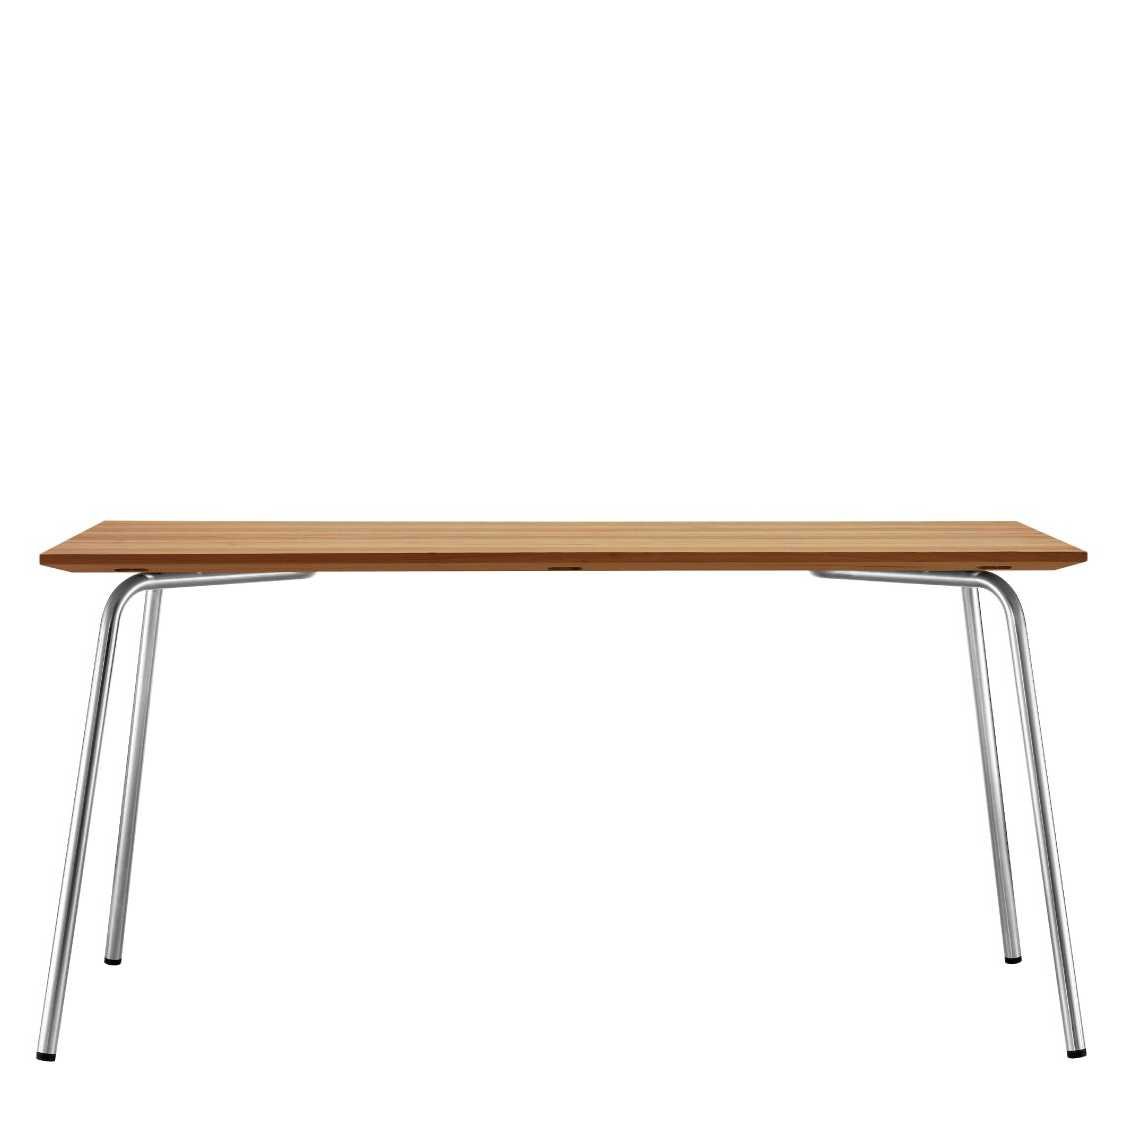 Thonet S 1040 dining table